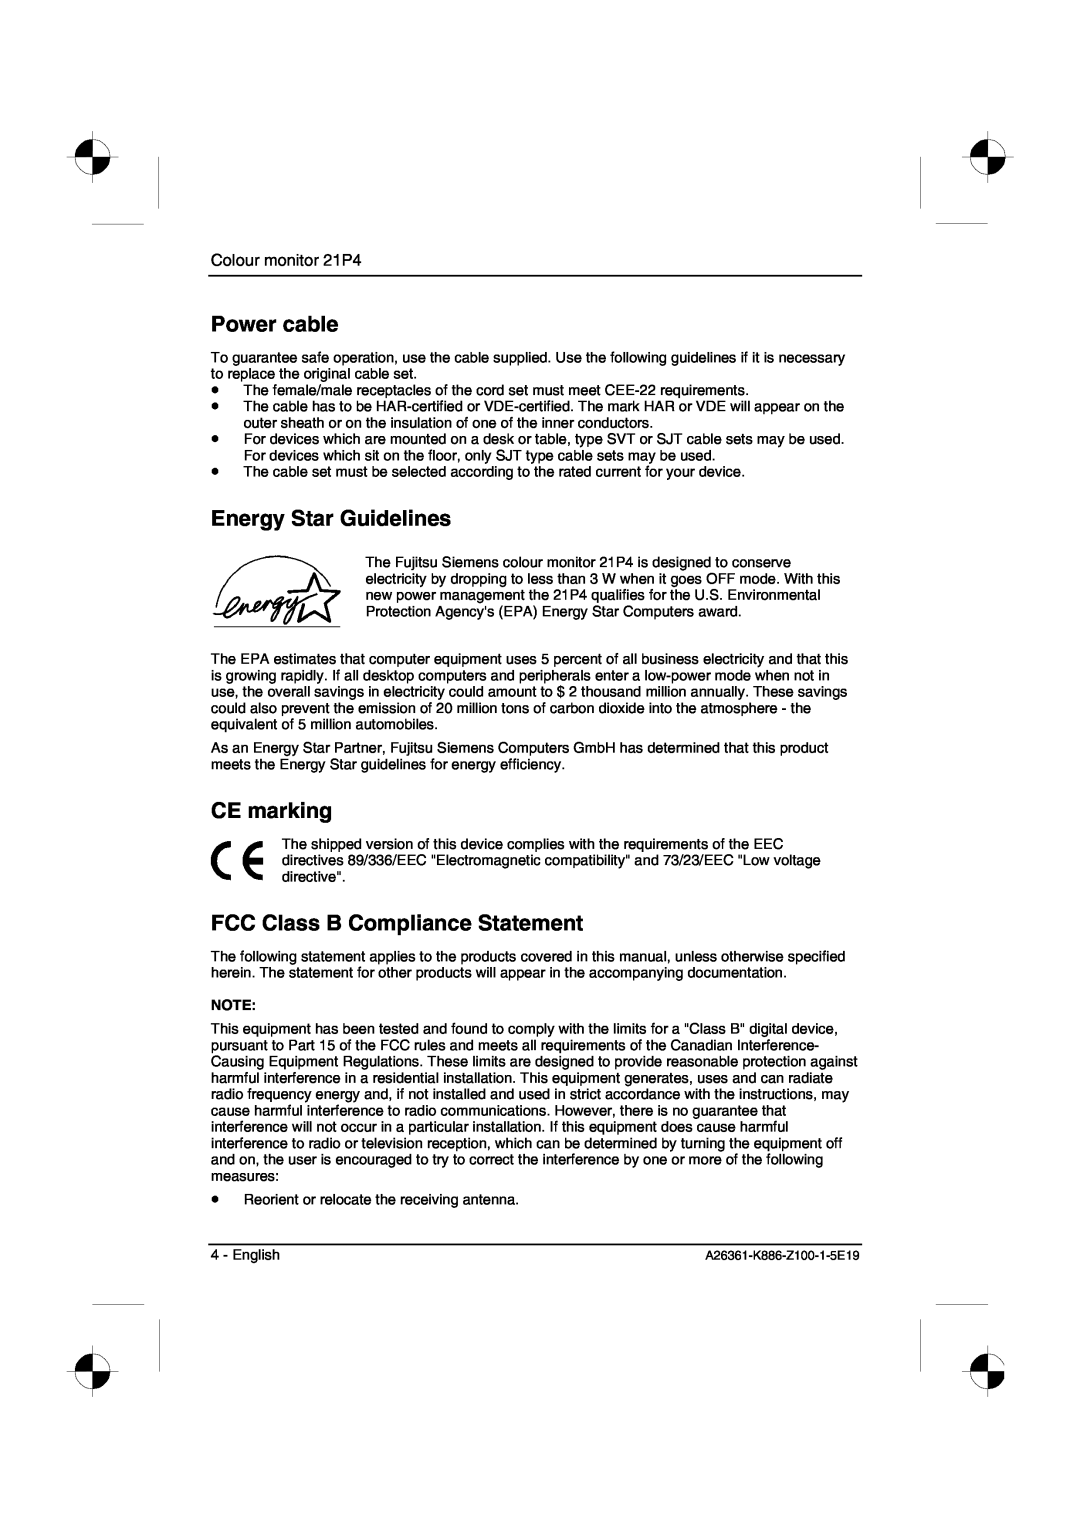 Fujitsu Siemens Computers 21P4 manual Power cable, Energy Star Guidelines, CE marking, FCC Class B Compliance Statement 